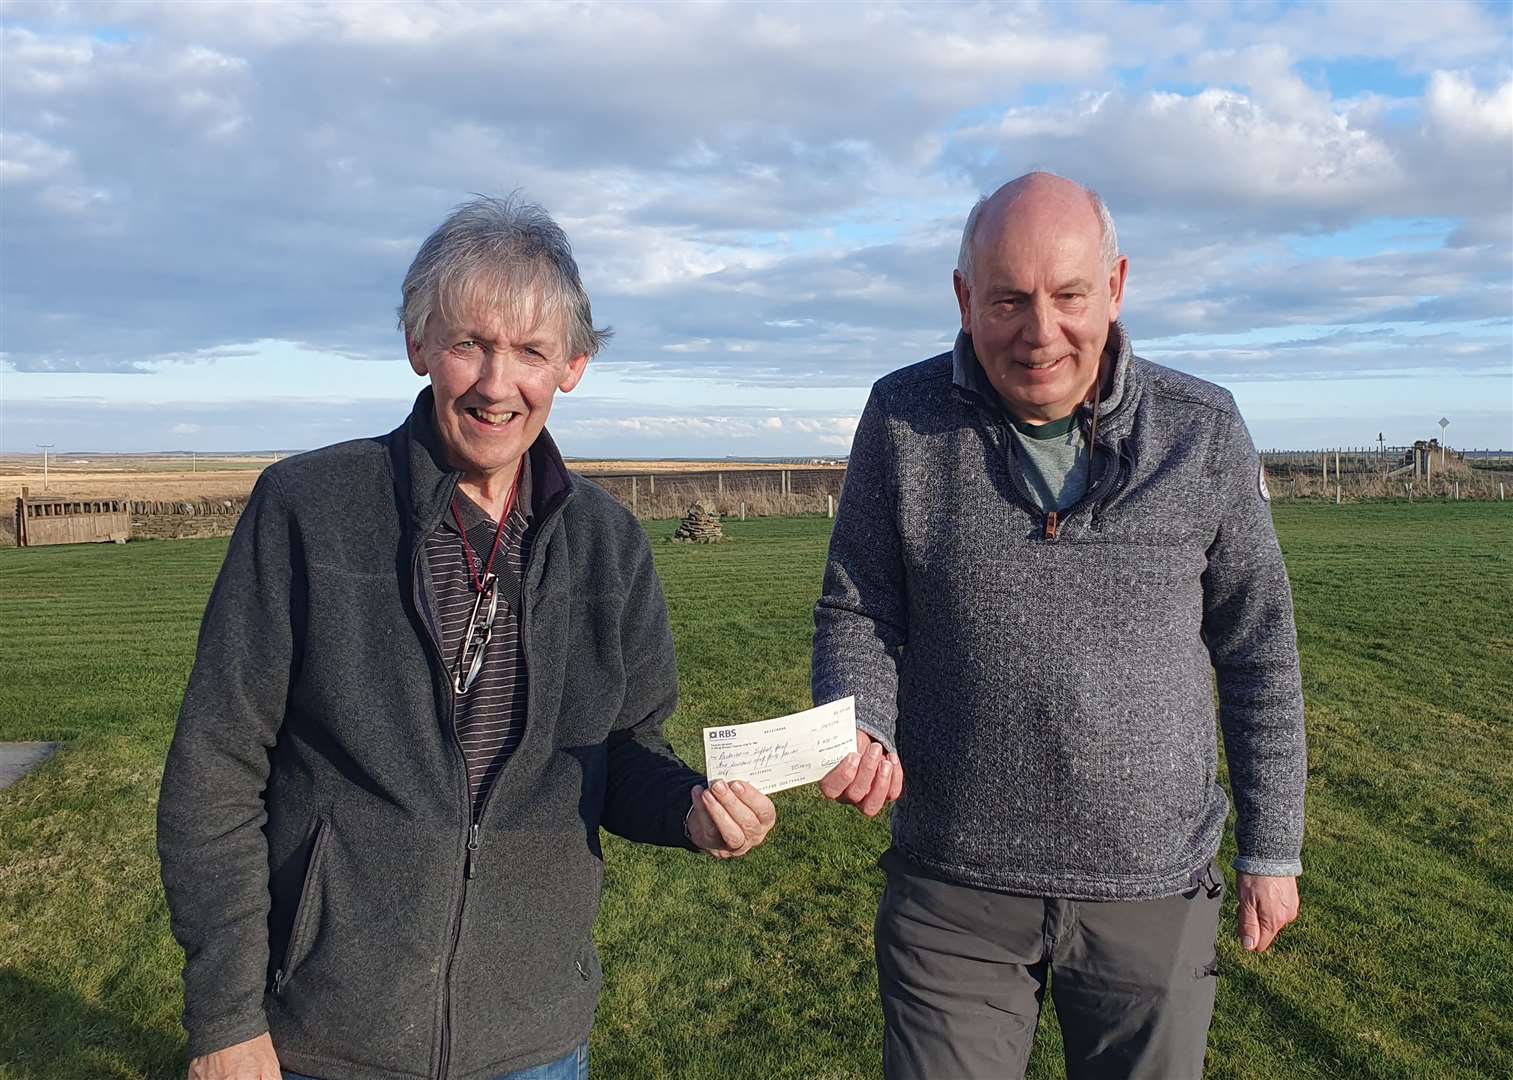 Andy Nicolson (left) of Britannia Bowling Club presents a cheque for £430 to Neil Morrison, chairman of the Caithness Parkinson’s Support Group.